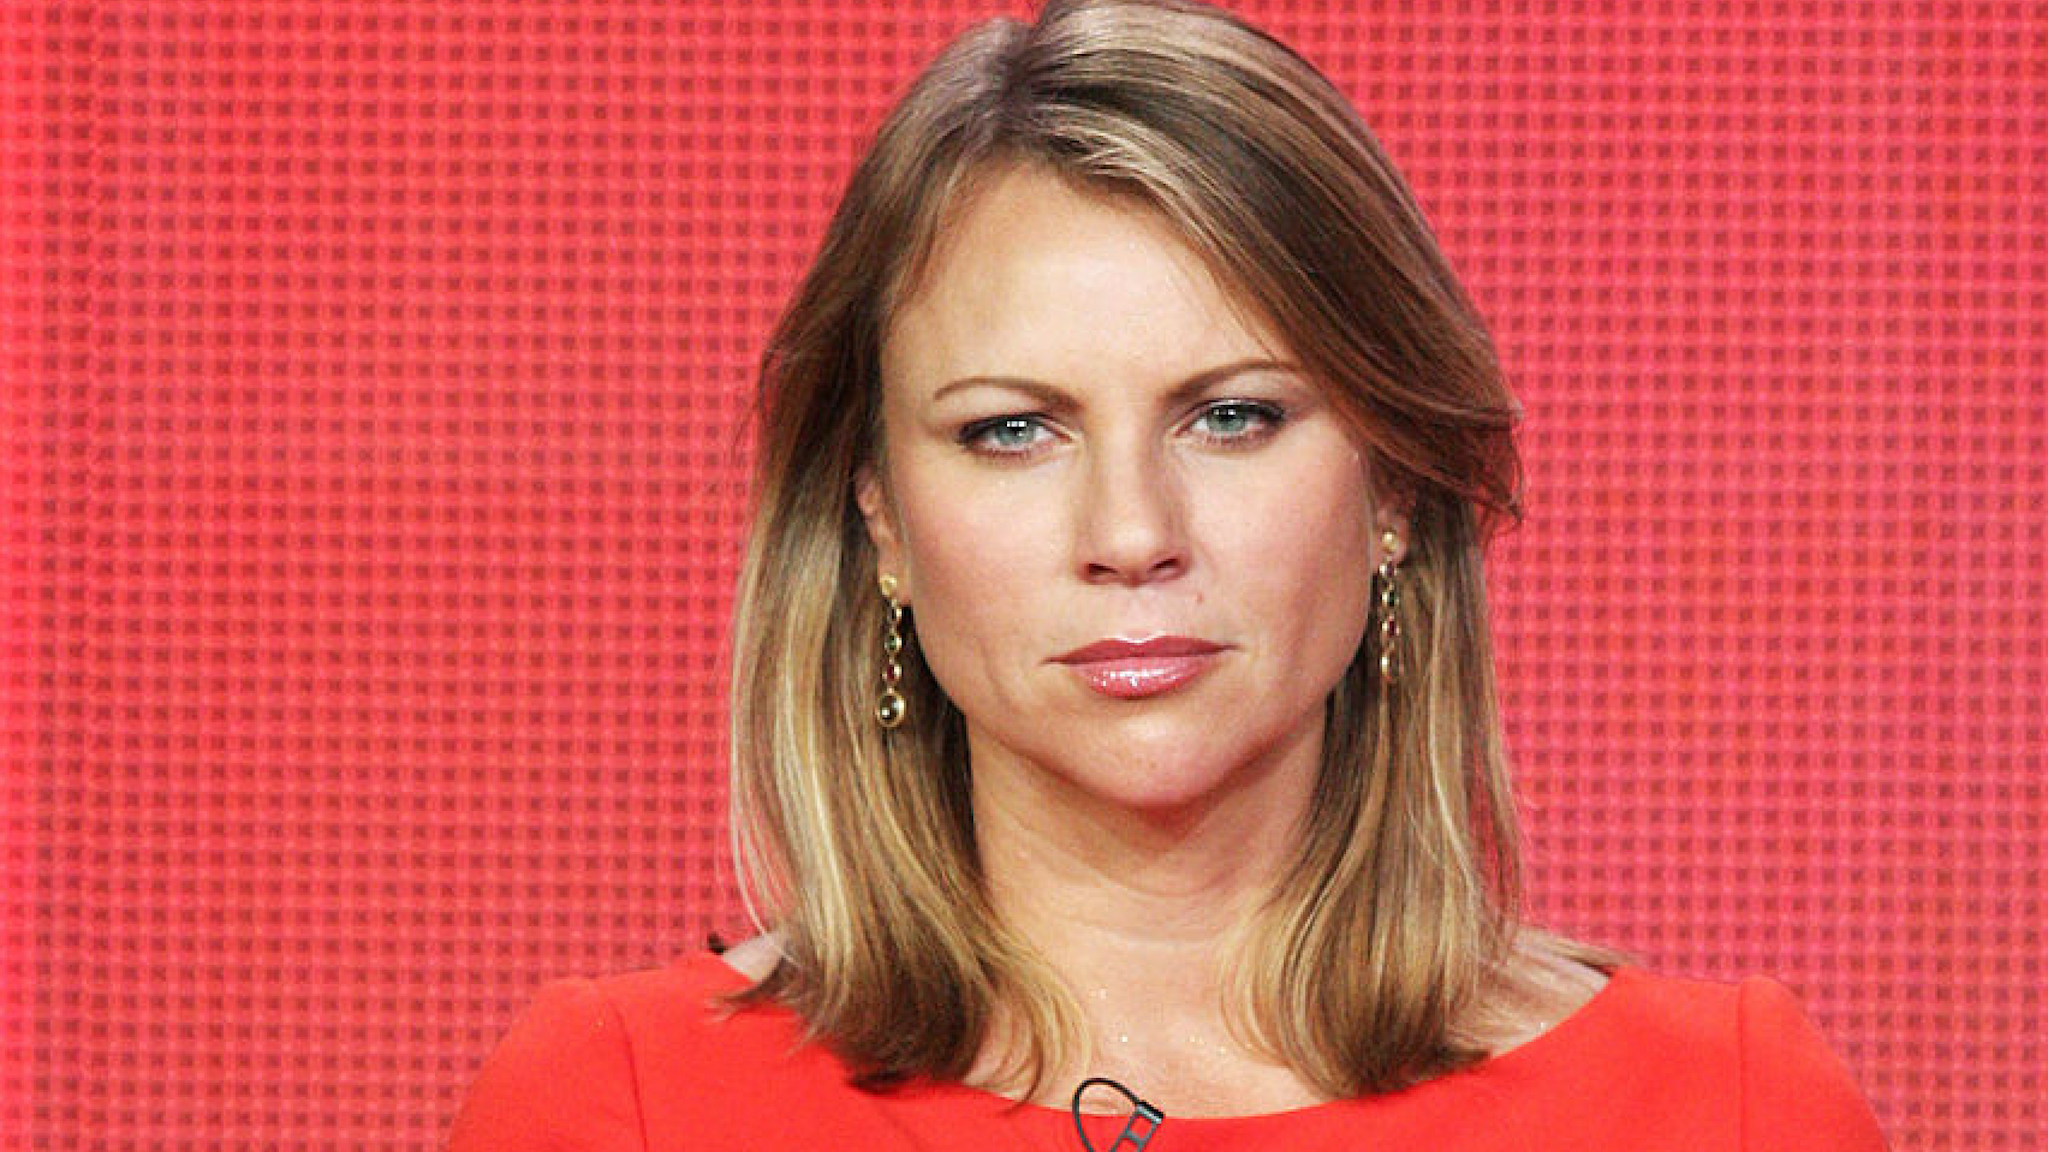 Correspondent Lara Logan of the TV show '60 Minutes Sports' attends the 2013 TCA Winter Press Tour CW/CBS panel held at The Langham Huntington Hotel and Spa on January 12, 2013 in Pasadena, California